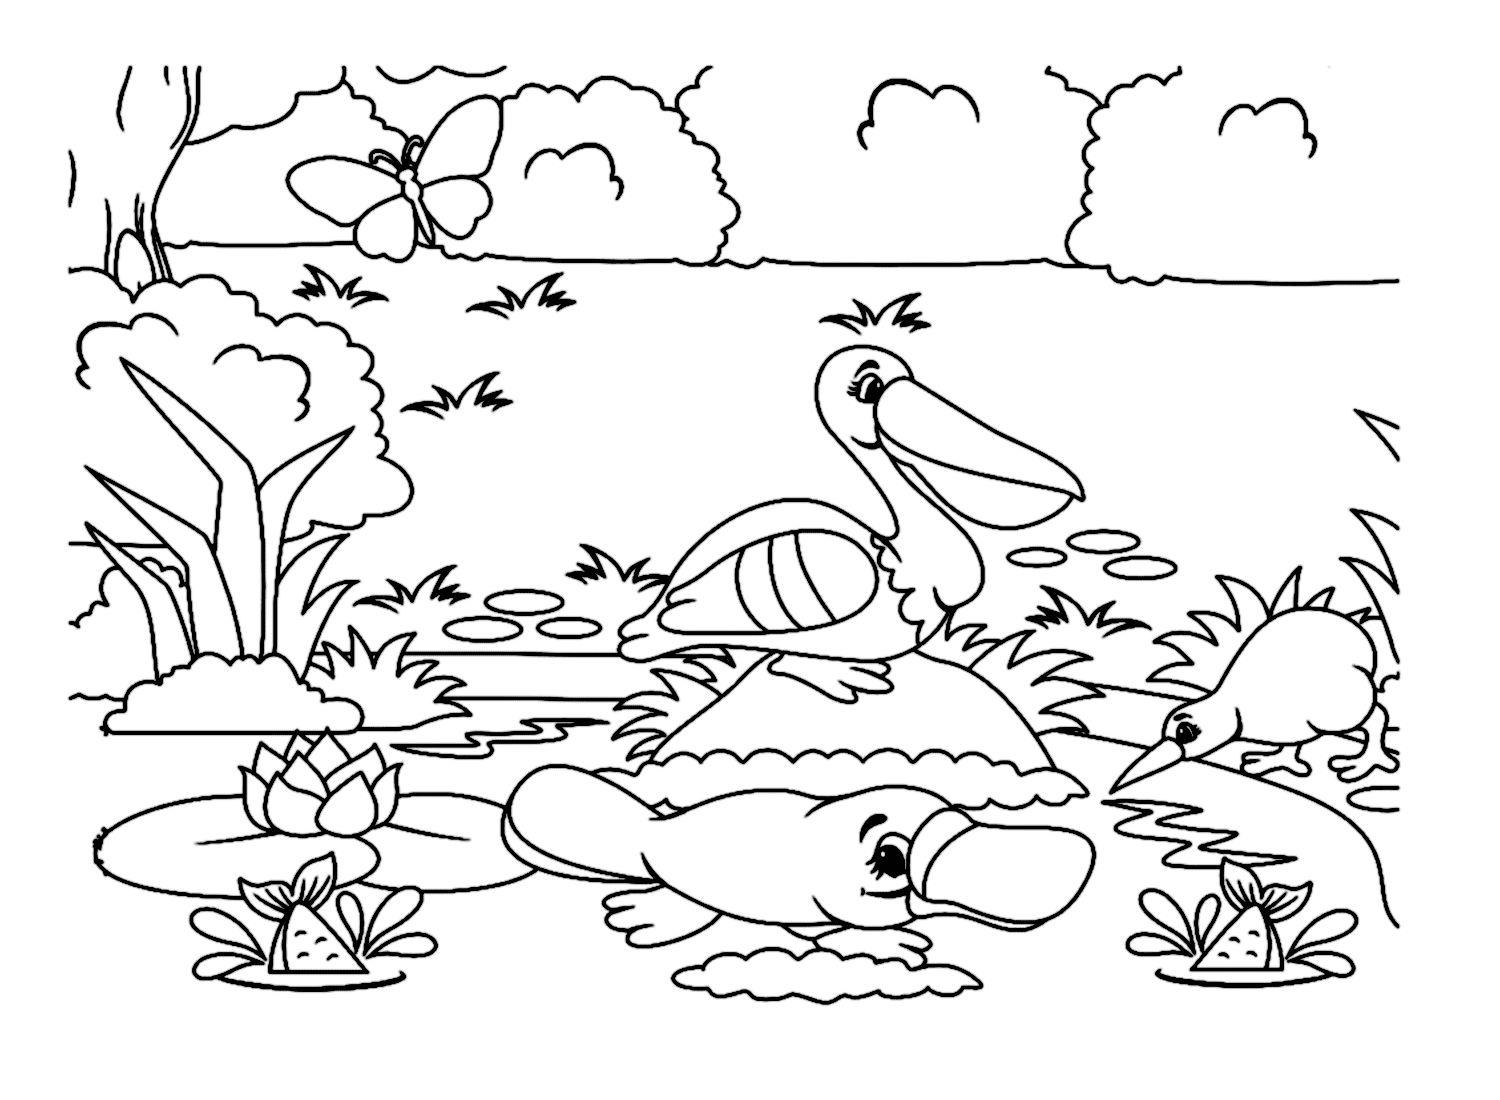 Platypus On River Bank With Other Animals from Platypus